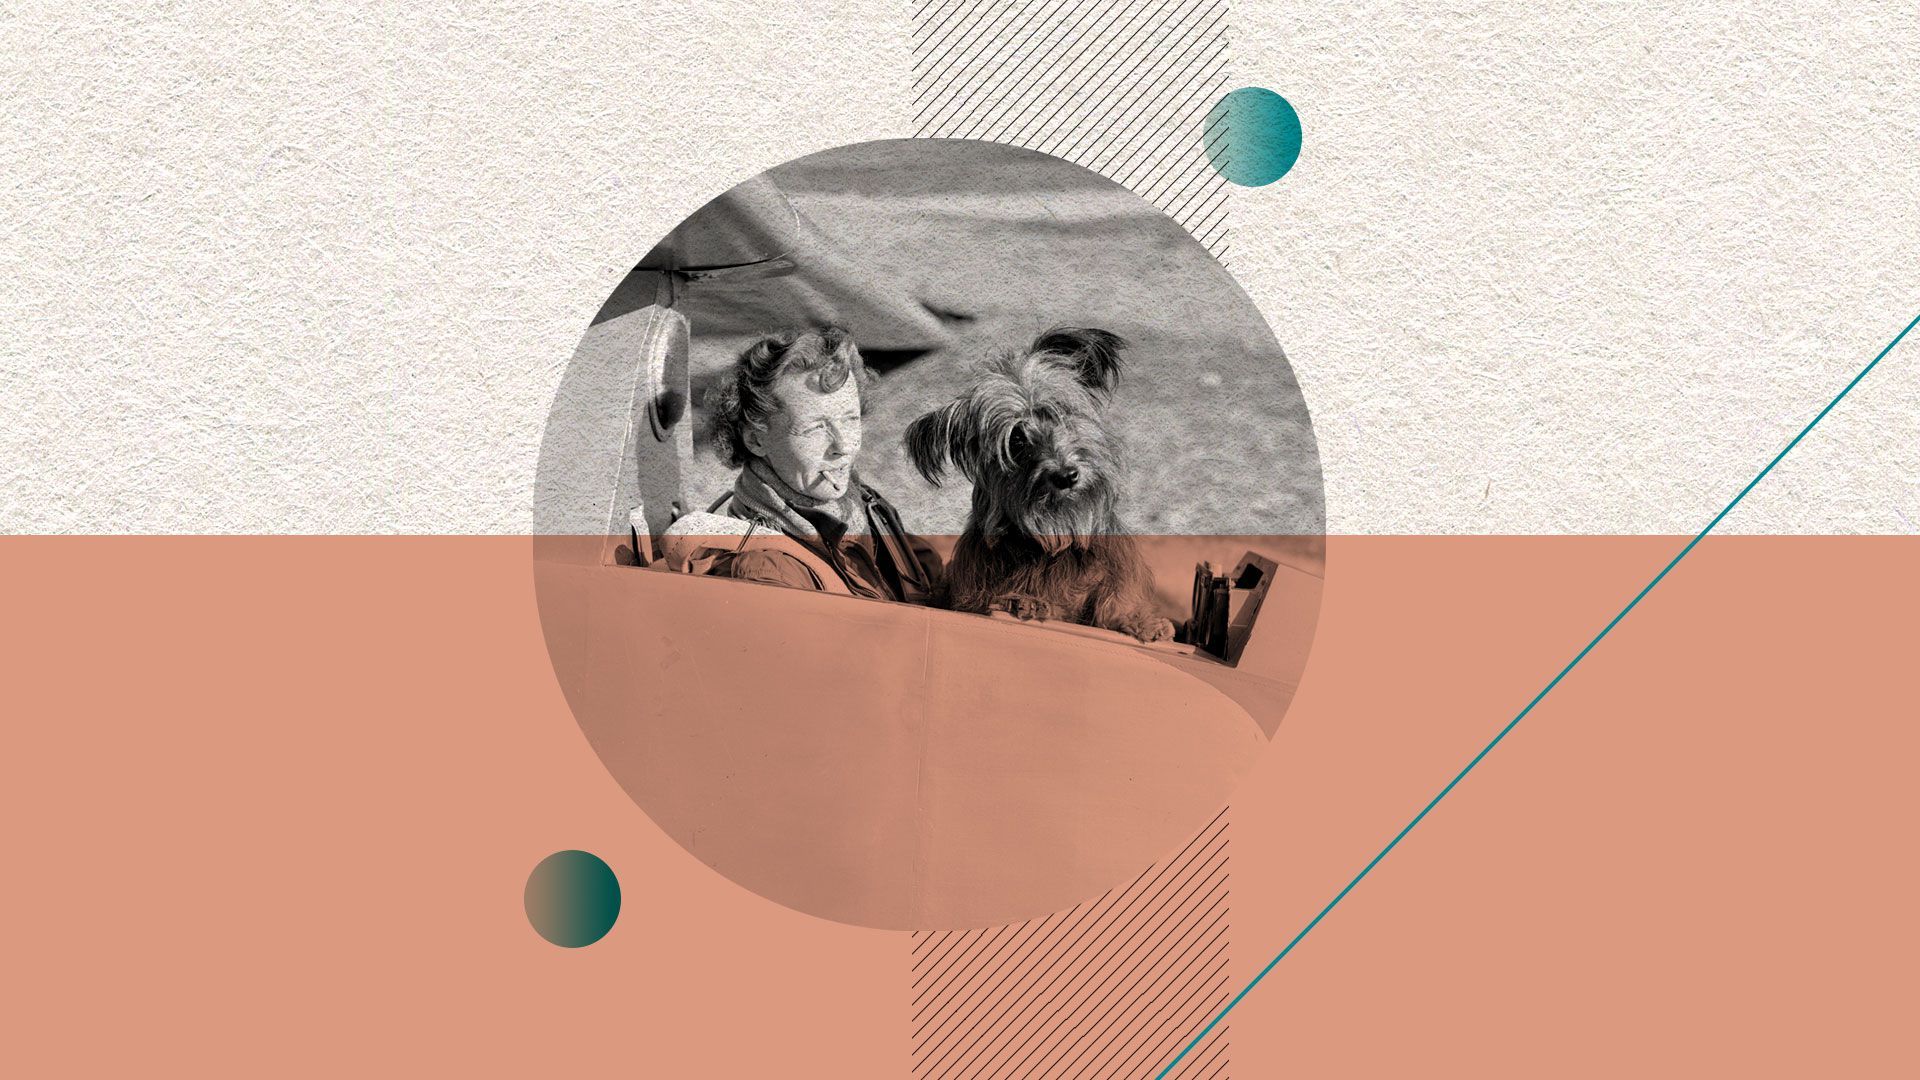 Photo illustration of a vintage airplane carrying a woman and a dog with circles and stripes